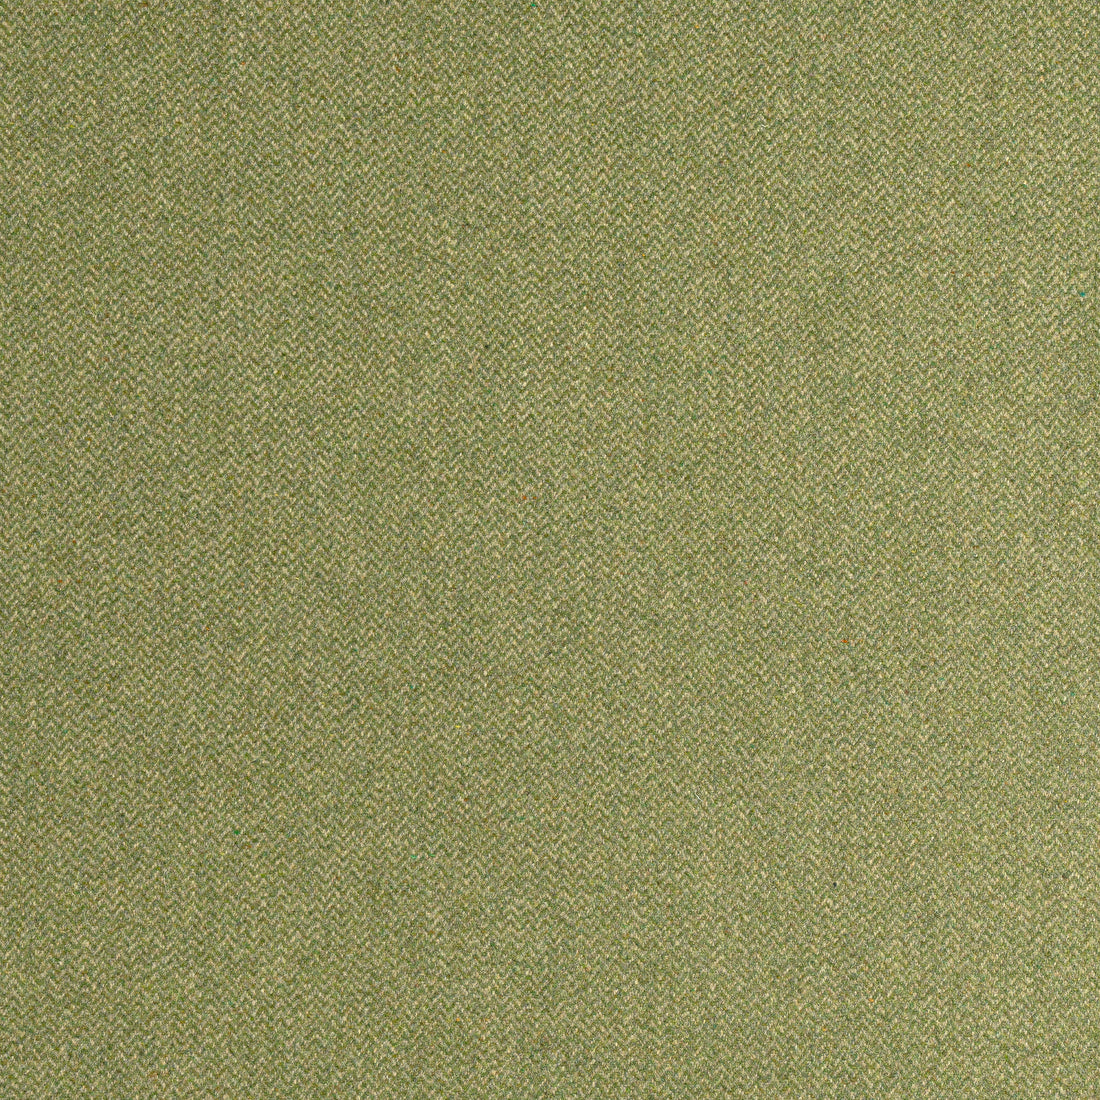 Dorset fabric in moss color - pattern number W80908 - by Thibaut in the Dunmore collection